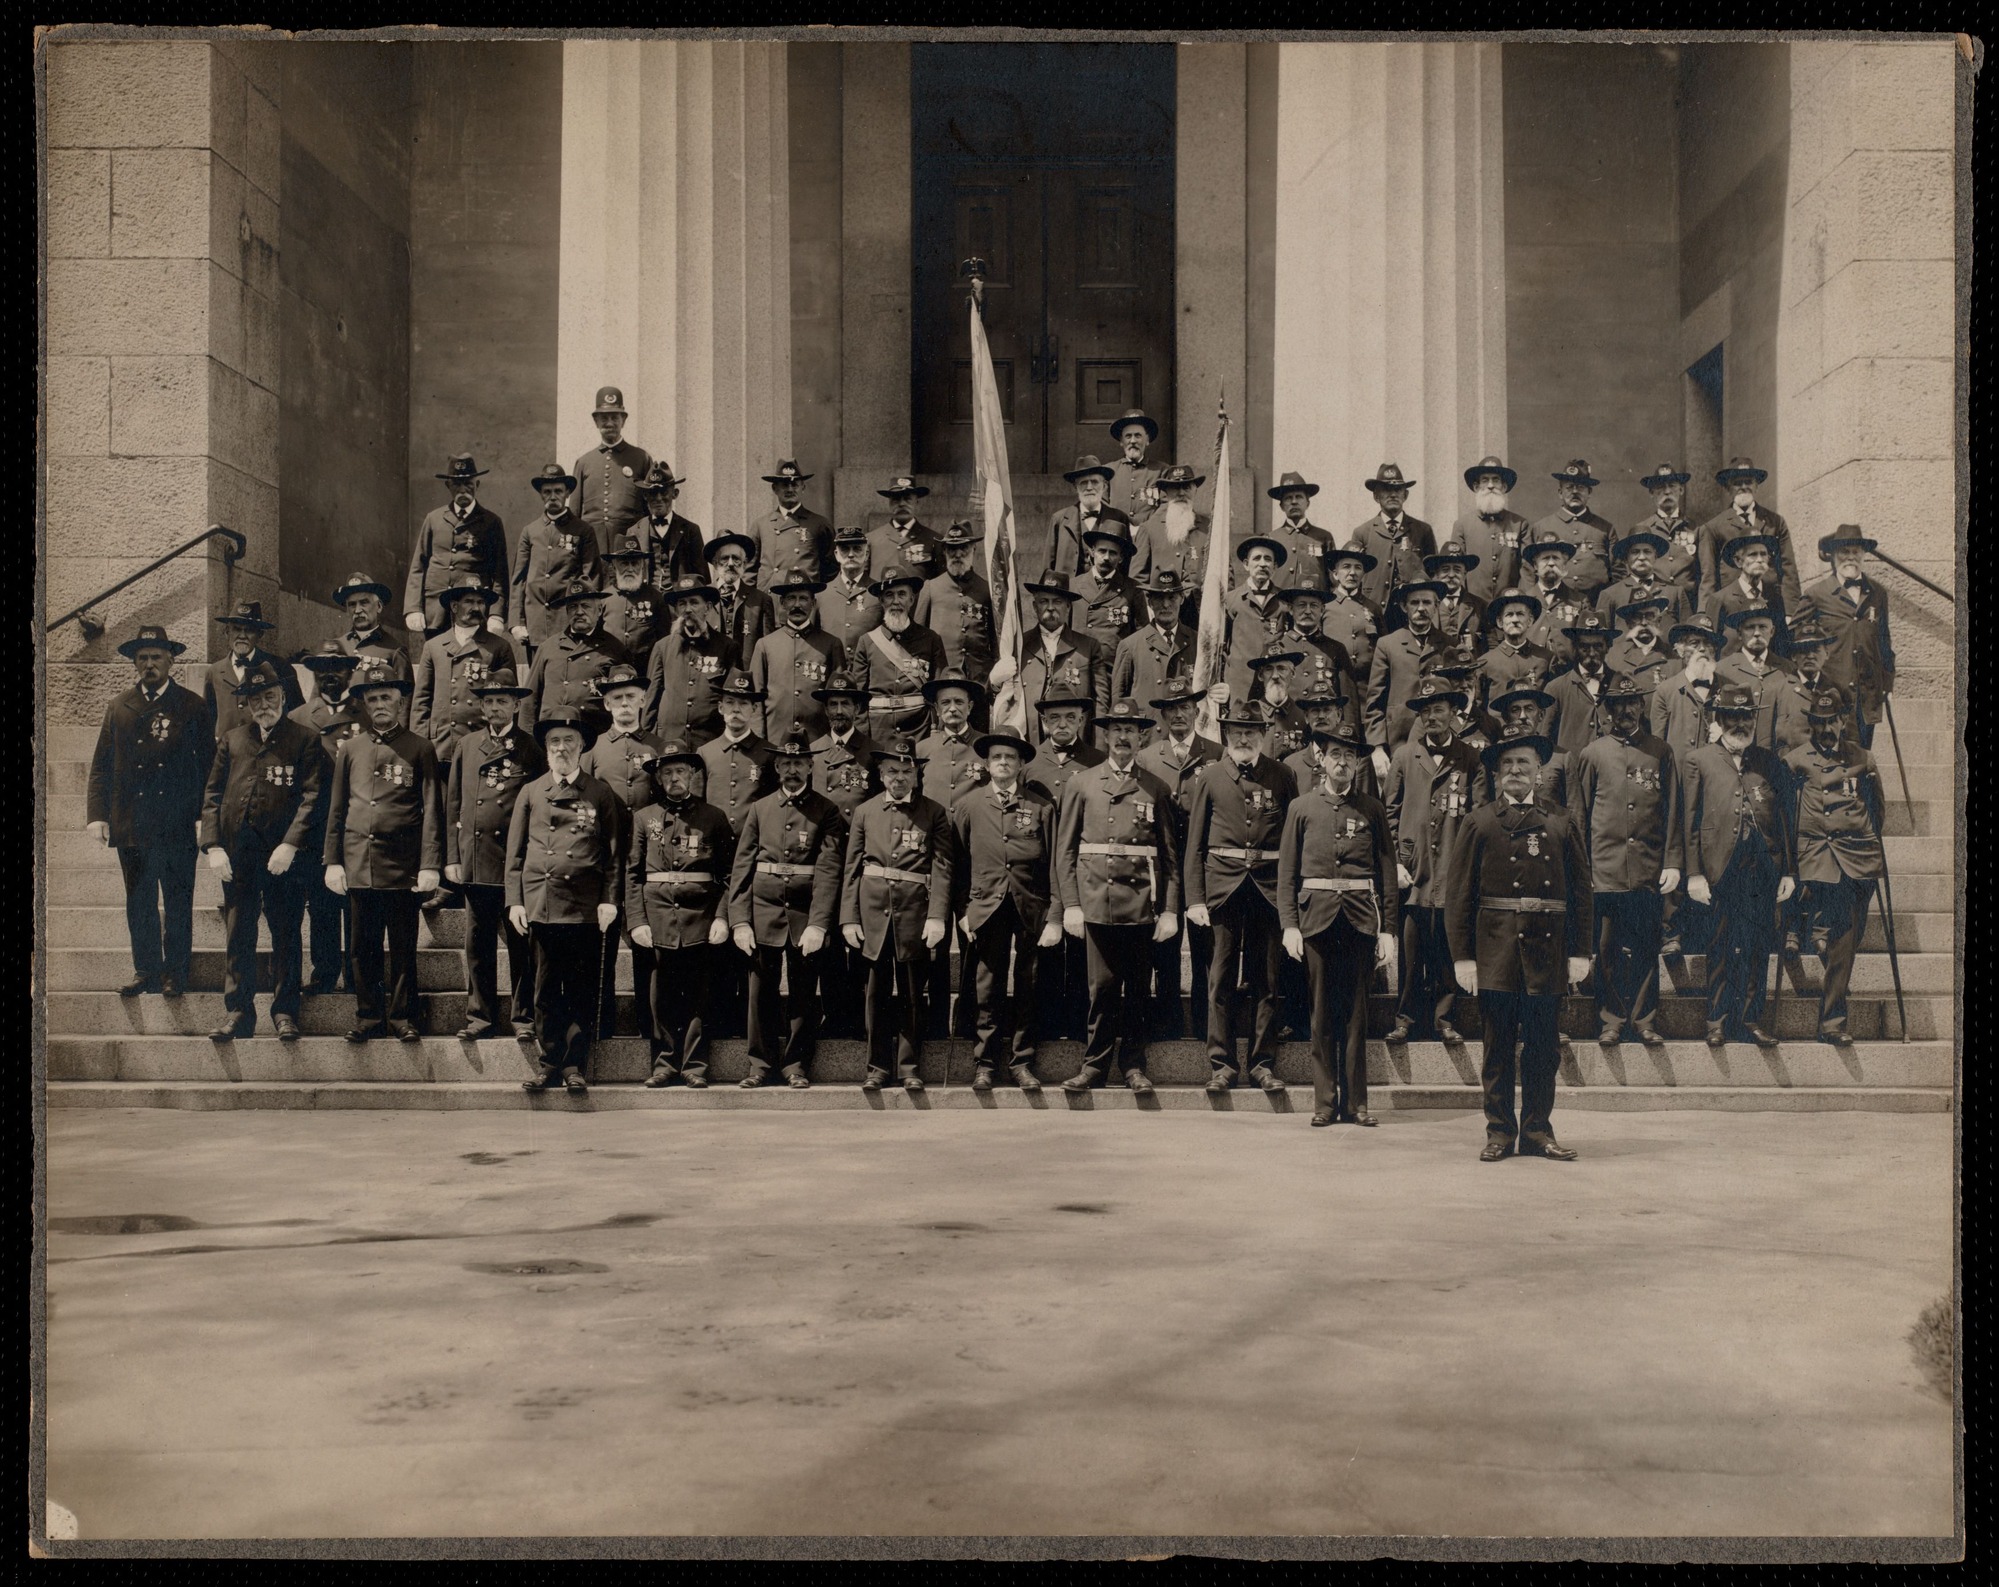 Black and white photograph of members of the Grand Army of the Republic Post 1 standing in front of a building with white columns. All men are dressed in uniform.